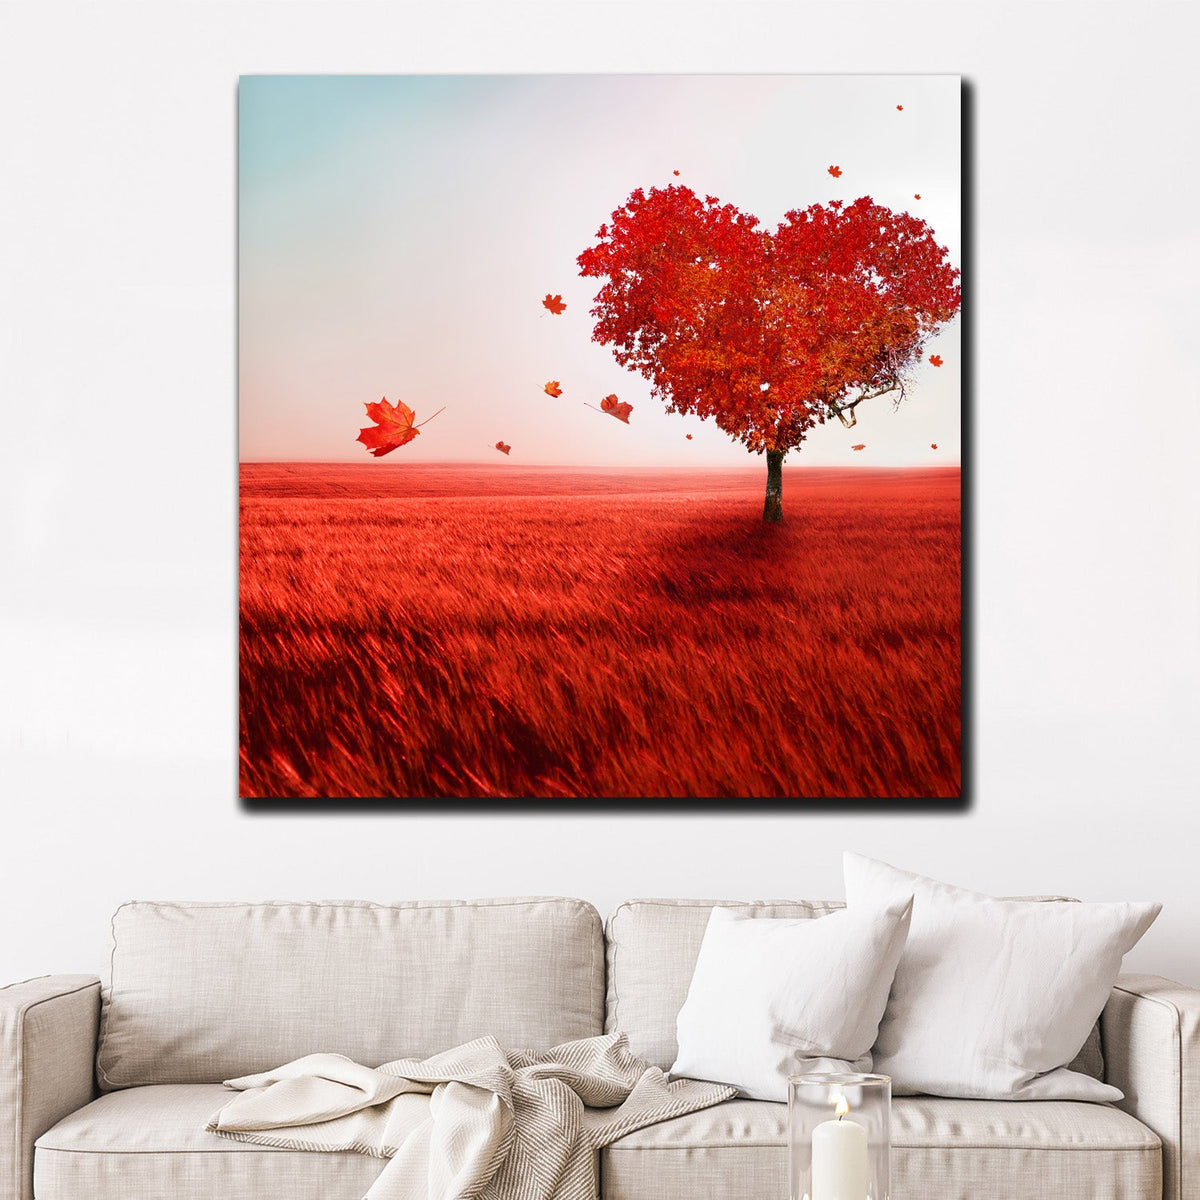 https://cdn.shopify.com/s/files/1/0387/9986/8044/products/TreeofLoveCanvasArtprintStretched-2.jpg